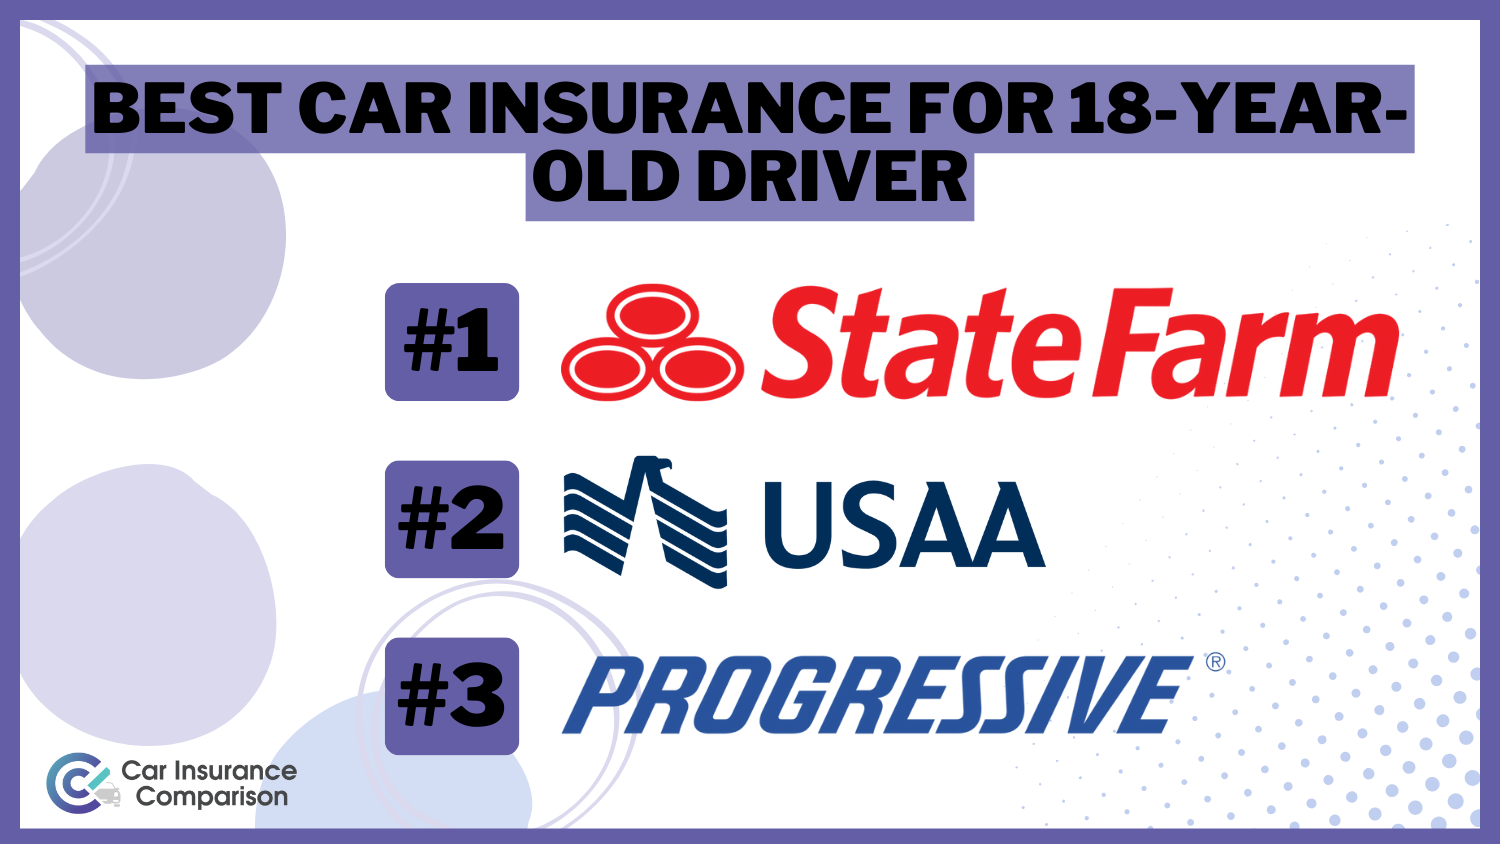 Best Car Insurance for 18-Year-Olds: State Farm, USAA and progressive